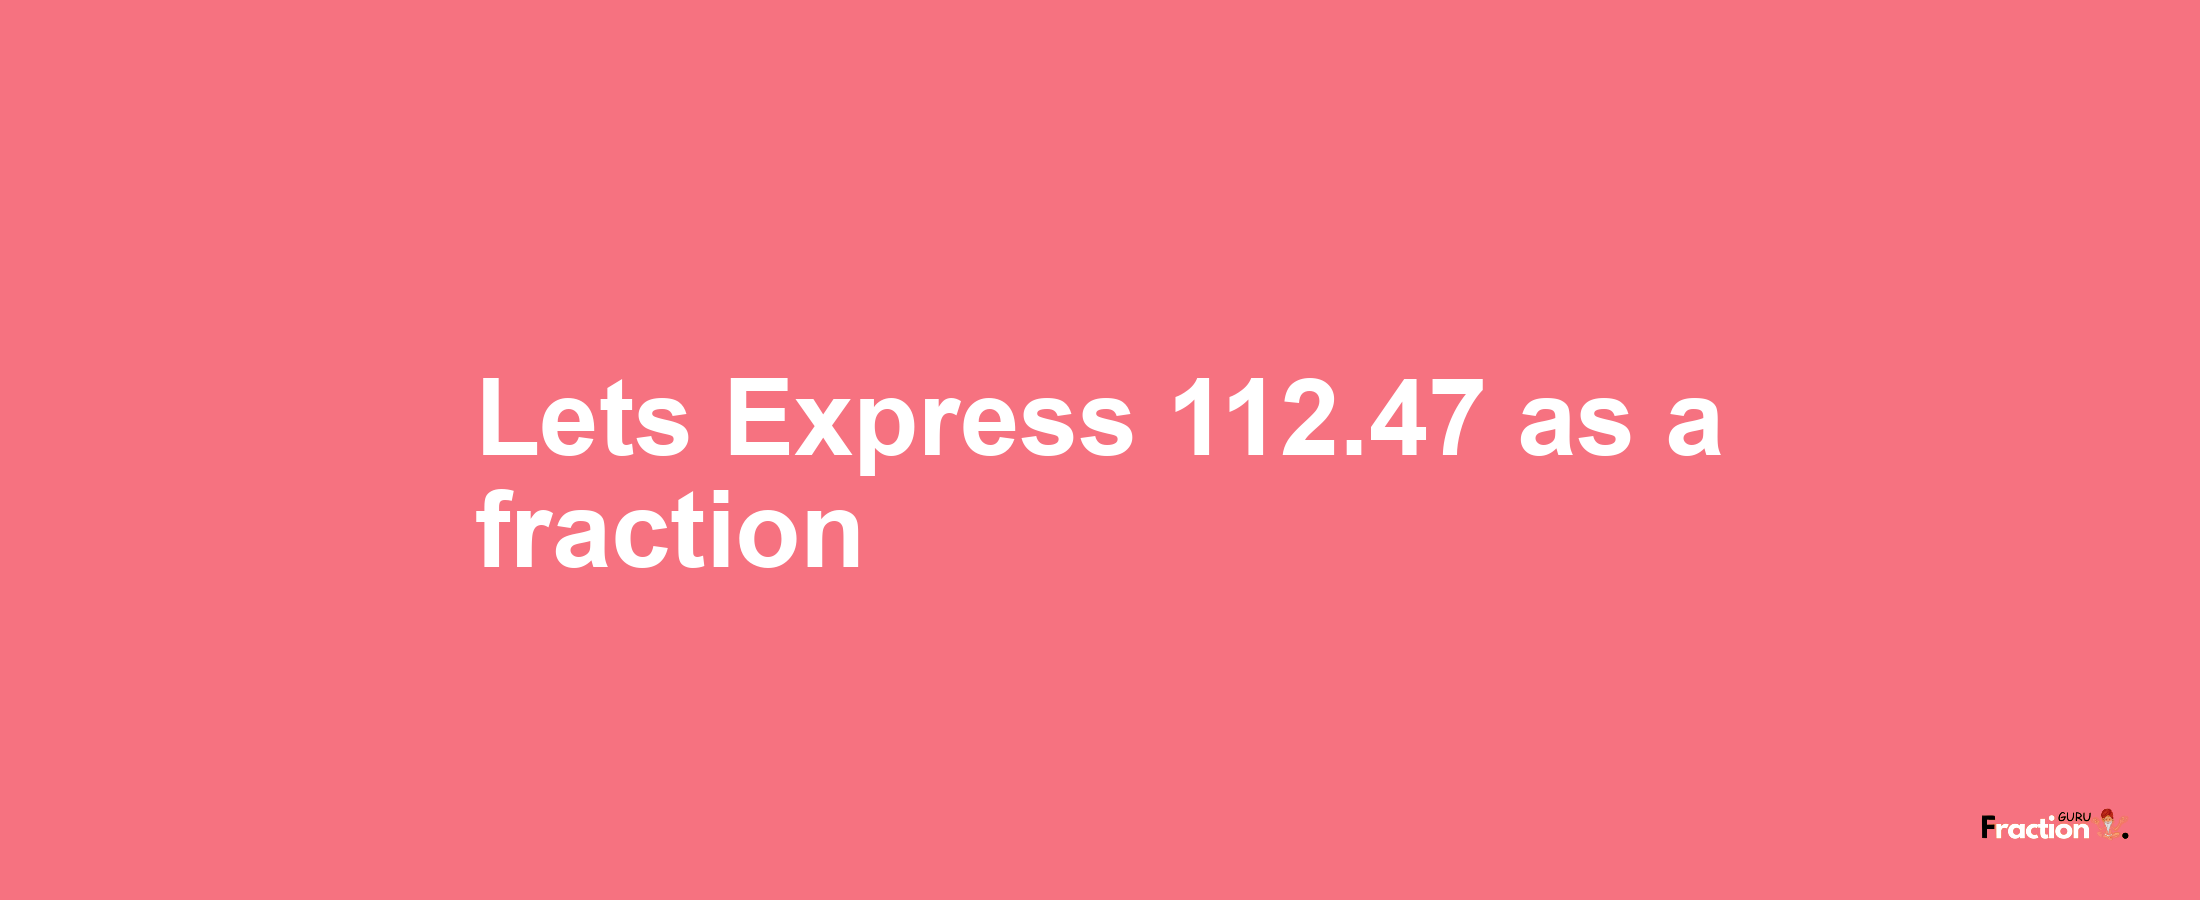 Lets Express 112.47 as afraction